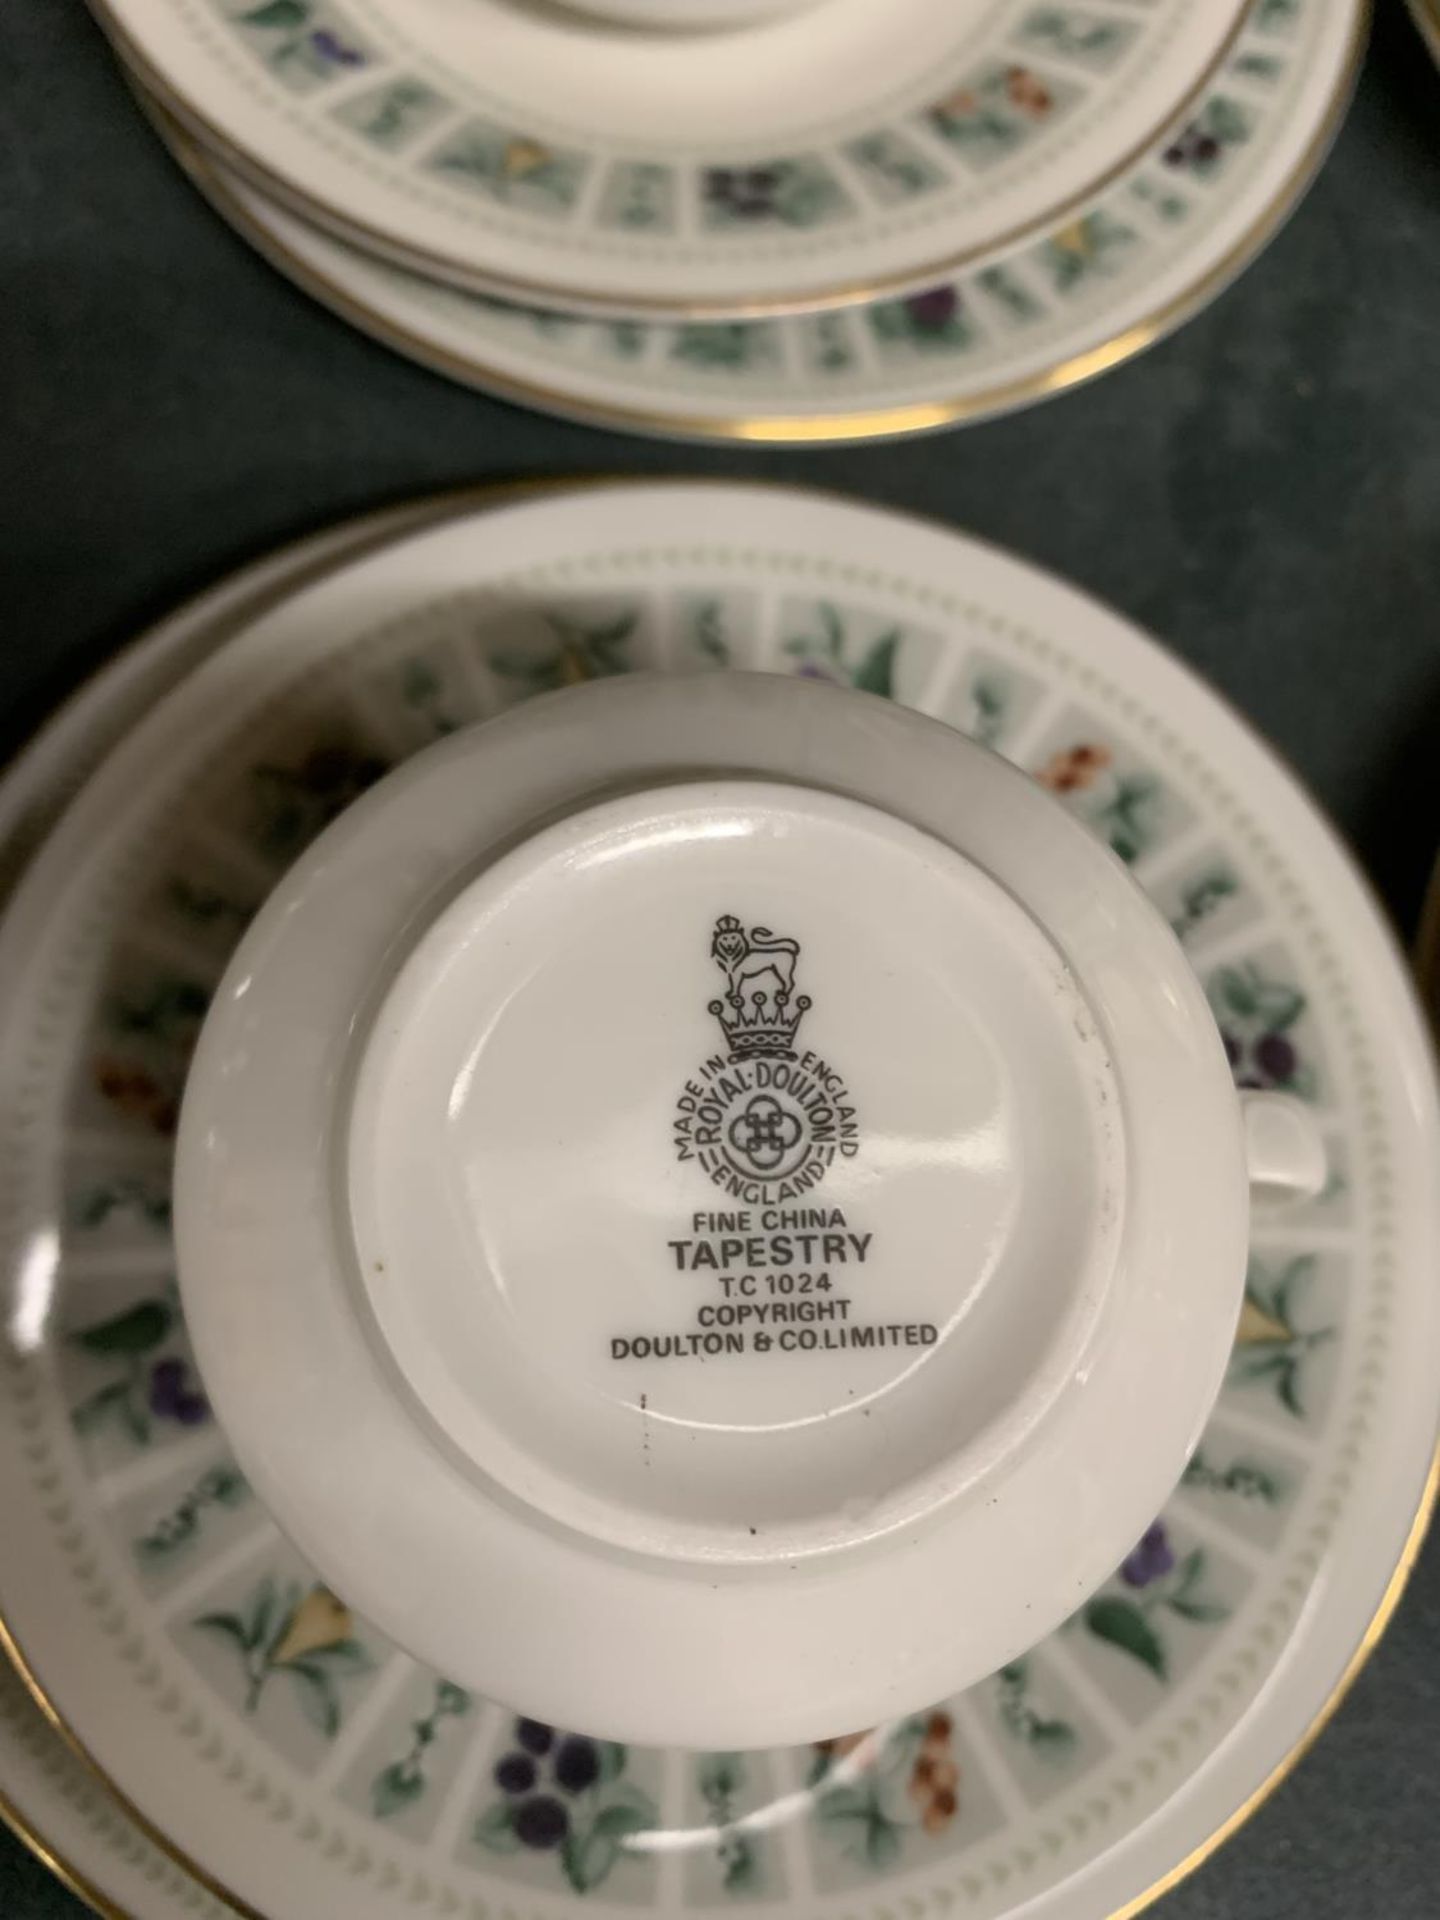 A ROYAL DOULTON 'TAPESTRY' DINNER SERVICE TO INCLUDE DINNER PLATES, SERVING TUREENS, BOWLS, CUPS, - Image 3 of 4